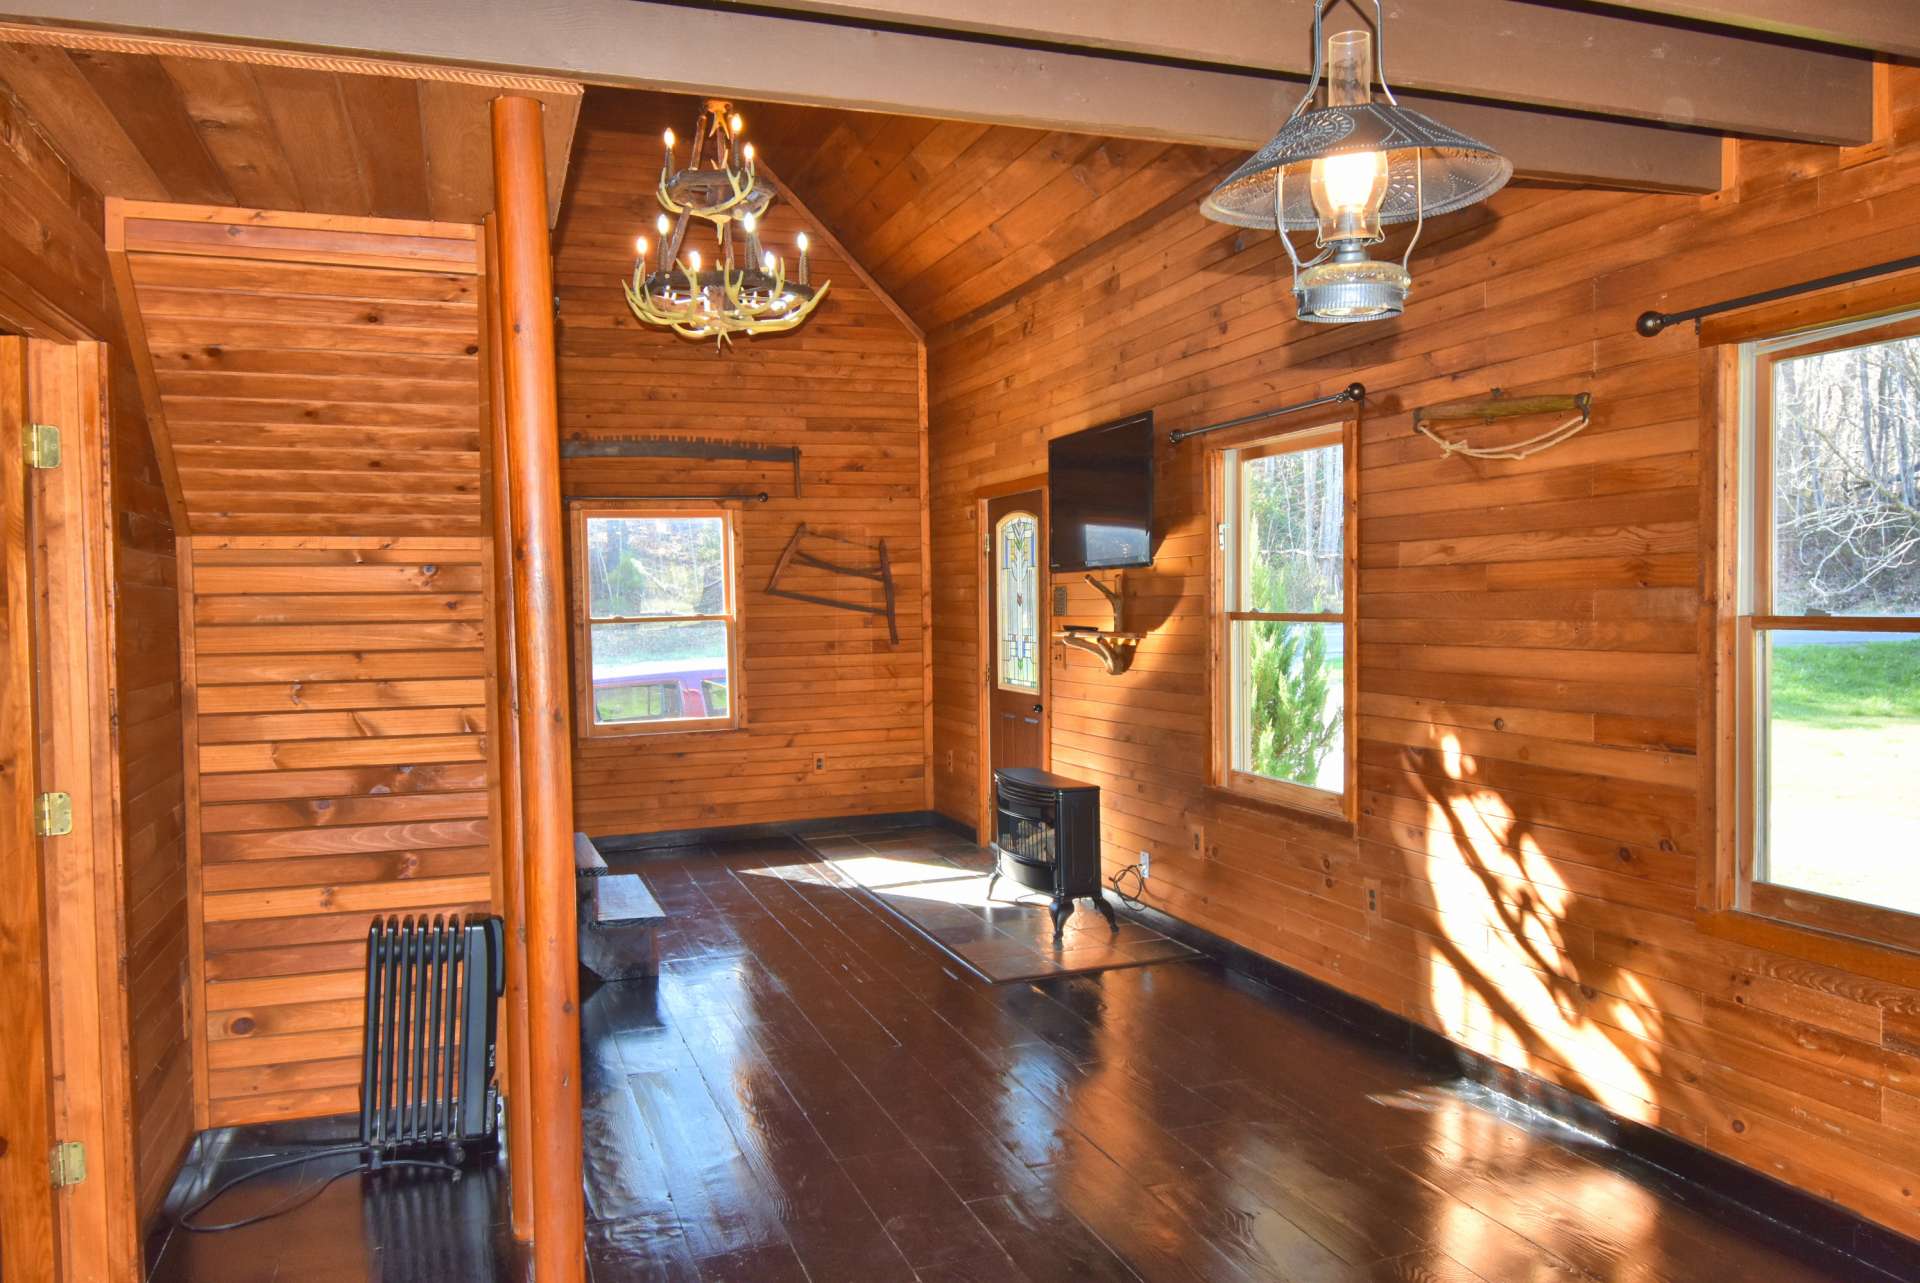 Exposed beams add to the cabin feel.